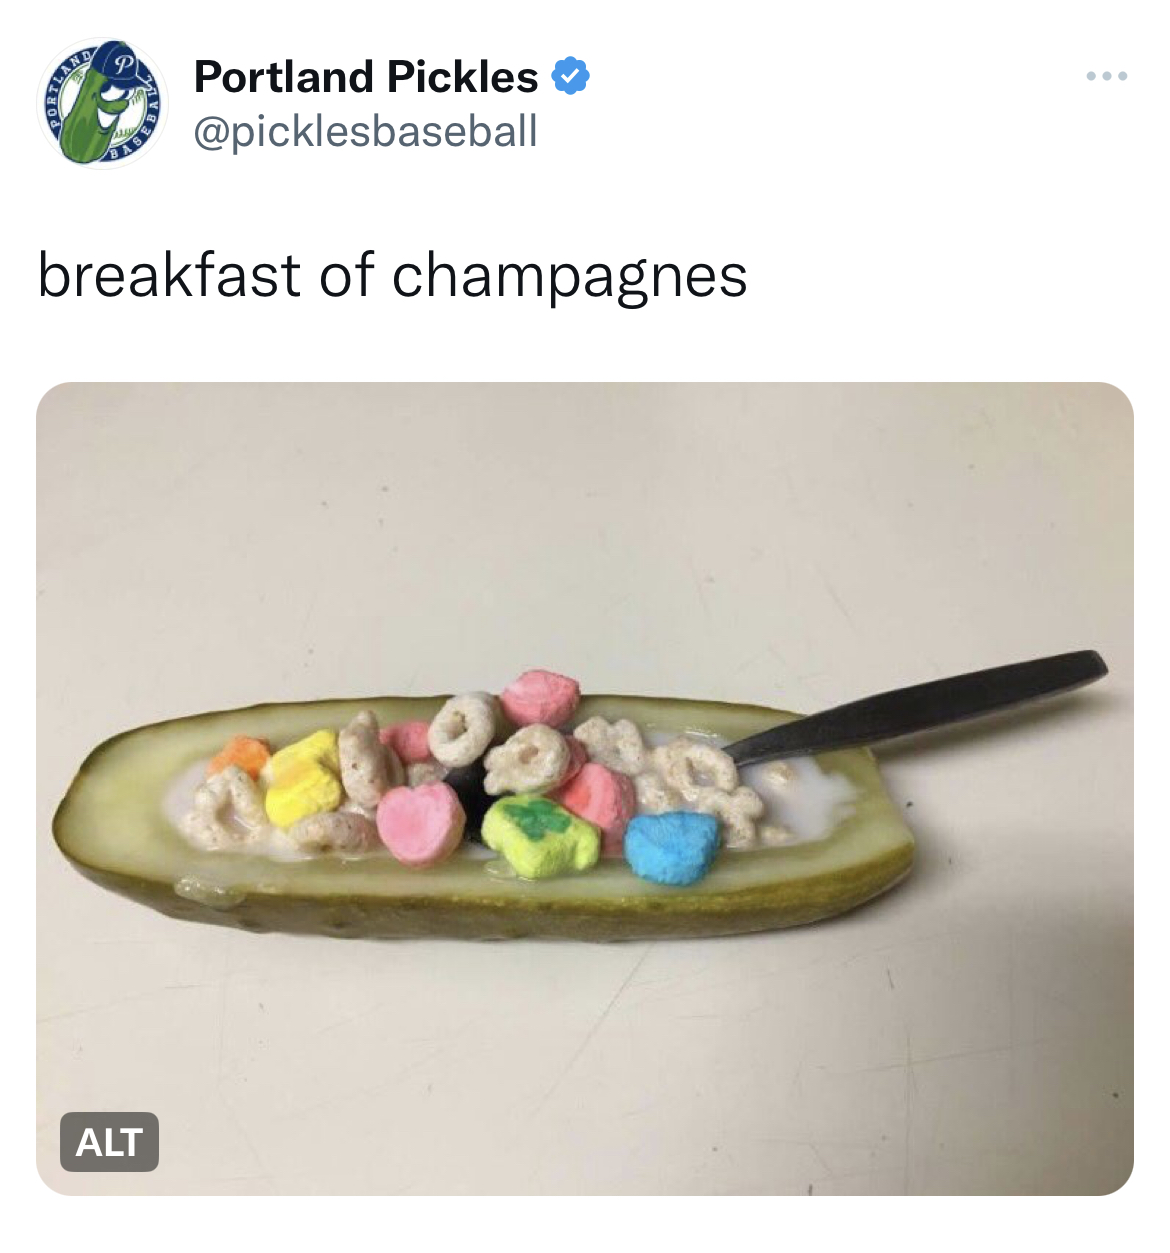 Untamed Tweets - pickles in places they shouldn t - Portland Pickles breakfast of champagnes Alt www